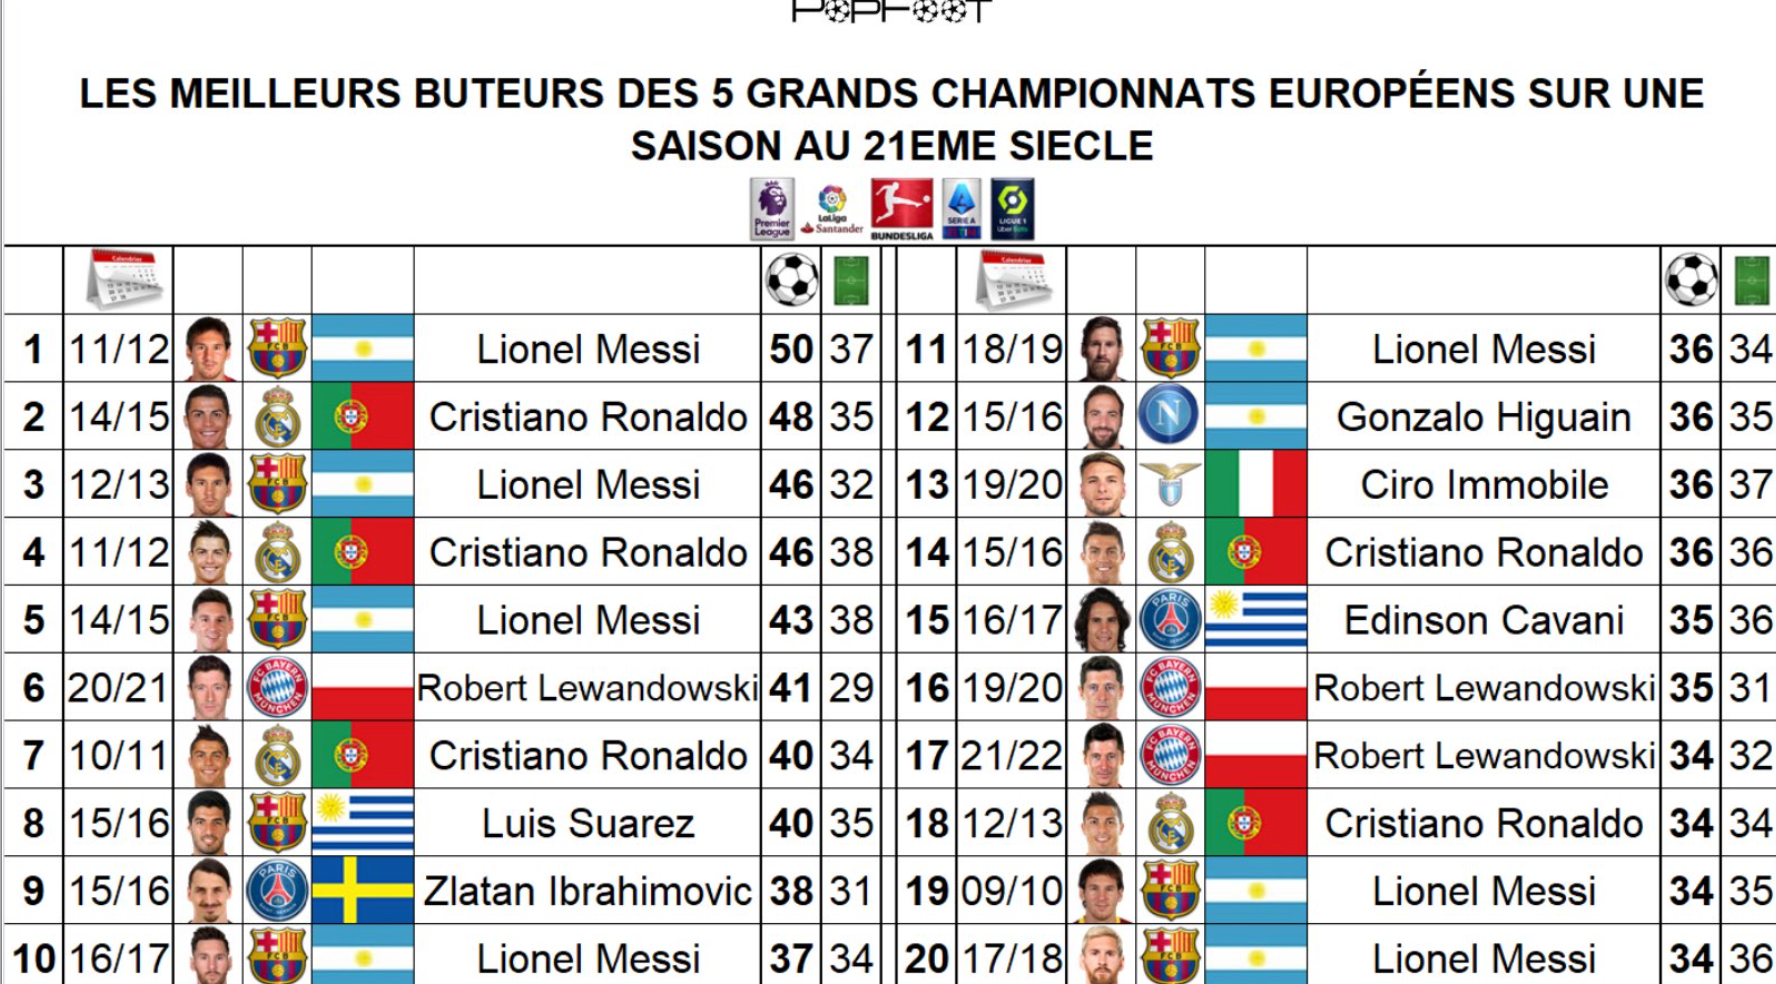 Lionel Messi and Cristiano Ronaldo dominate list of players with the most prolific seasons in Europe's top five leagues since 2000